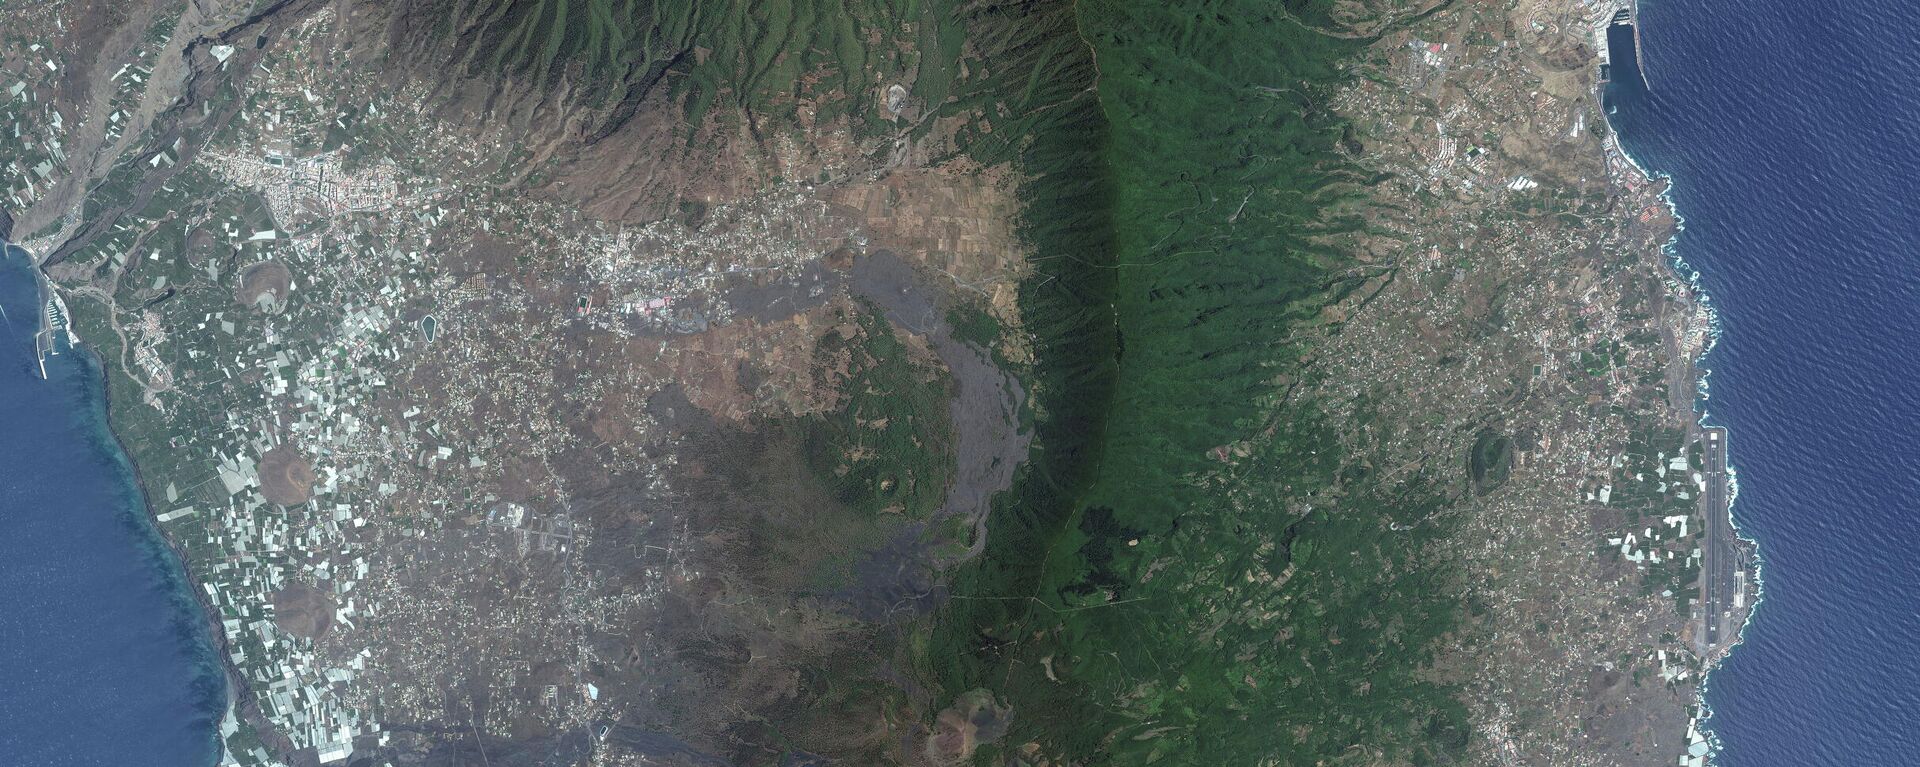 A satellite image shows the overview of Cumbre Vieja volcano on the island of La Palma, Spain on September 17, 2021 before the eruptions of the volcano. - Sputnik International, 1920, 23.09.2021